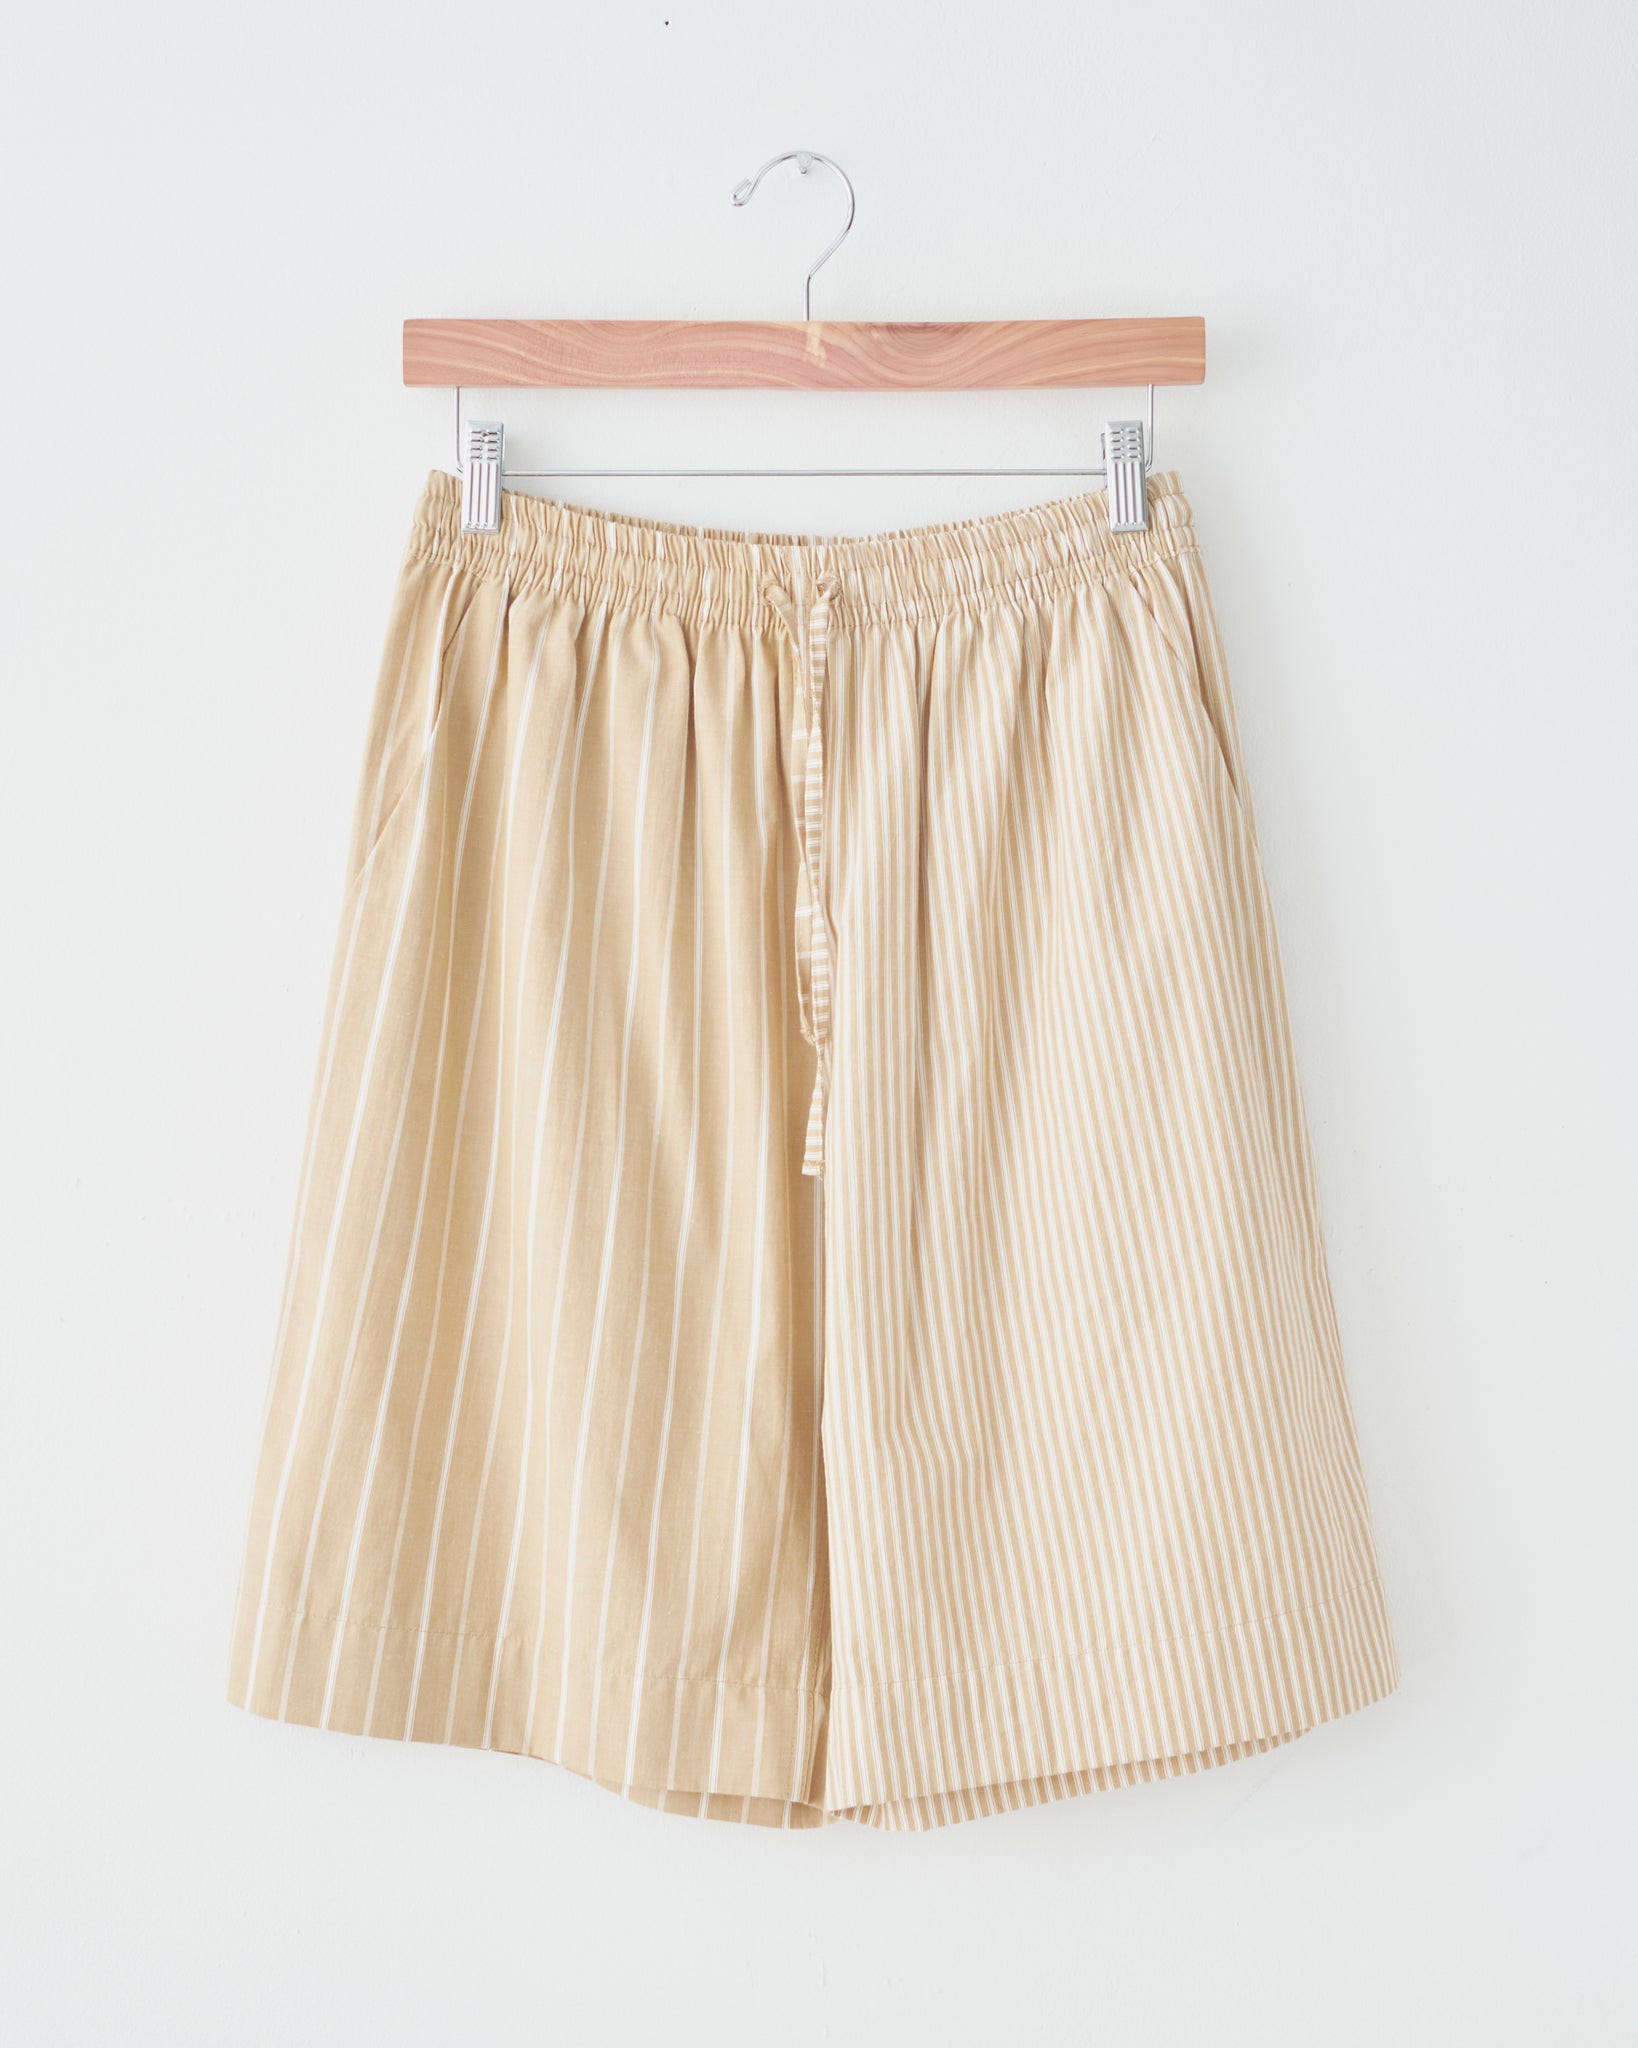 Nine AM Shorts, White and Brown